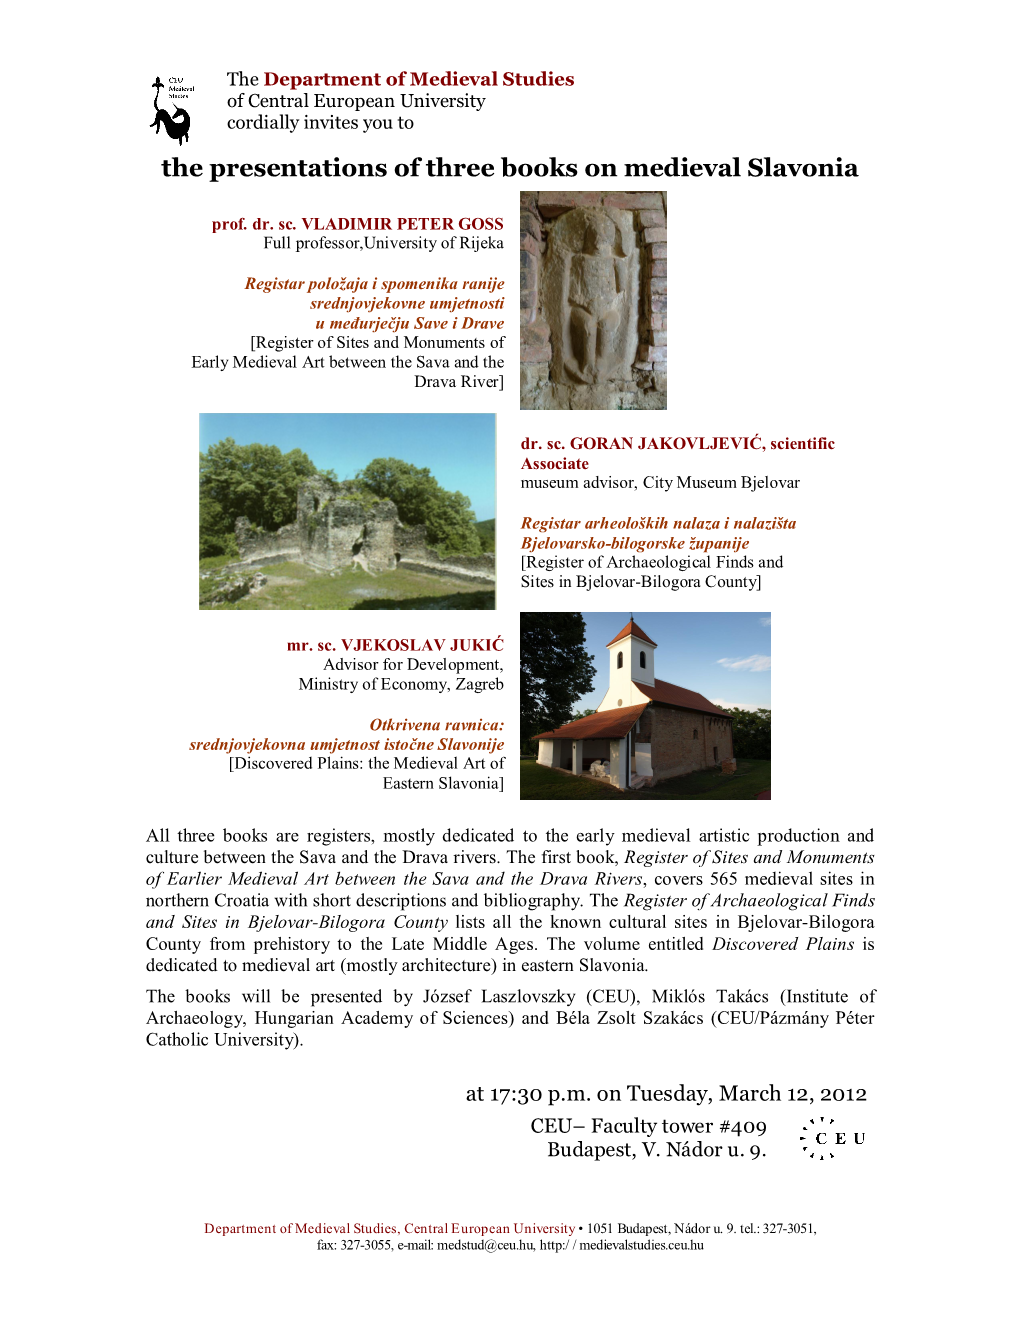 The Presentations of Three Books on Medieval Slavonia